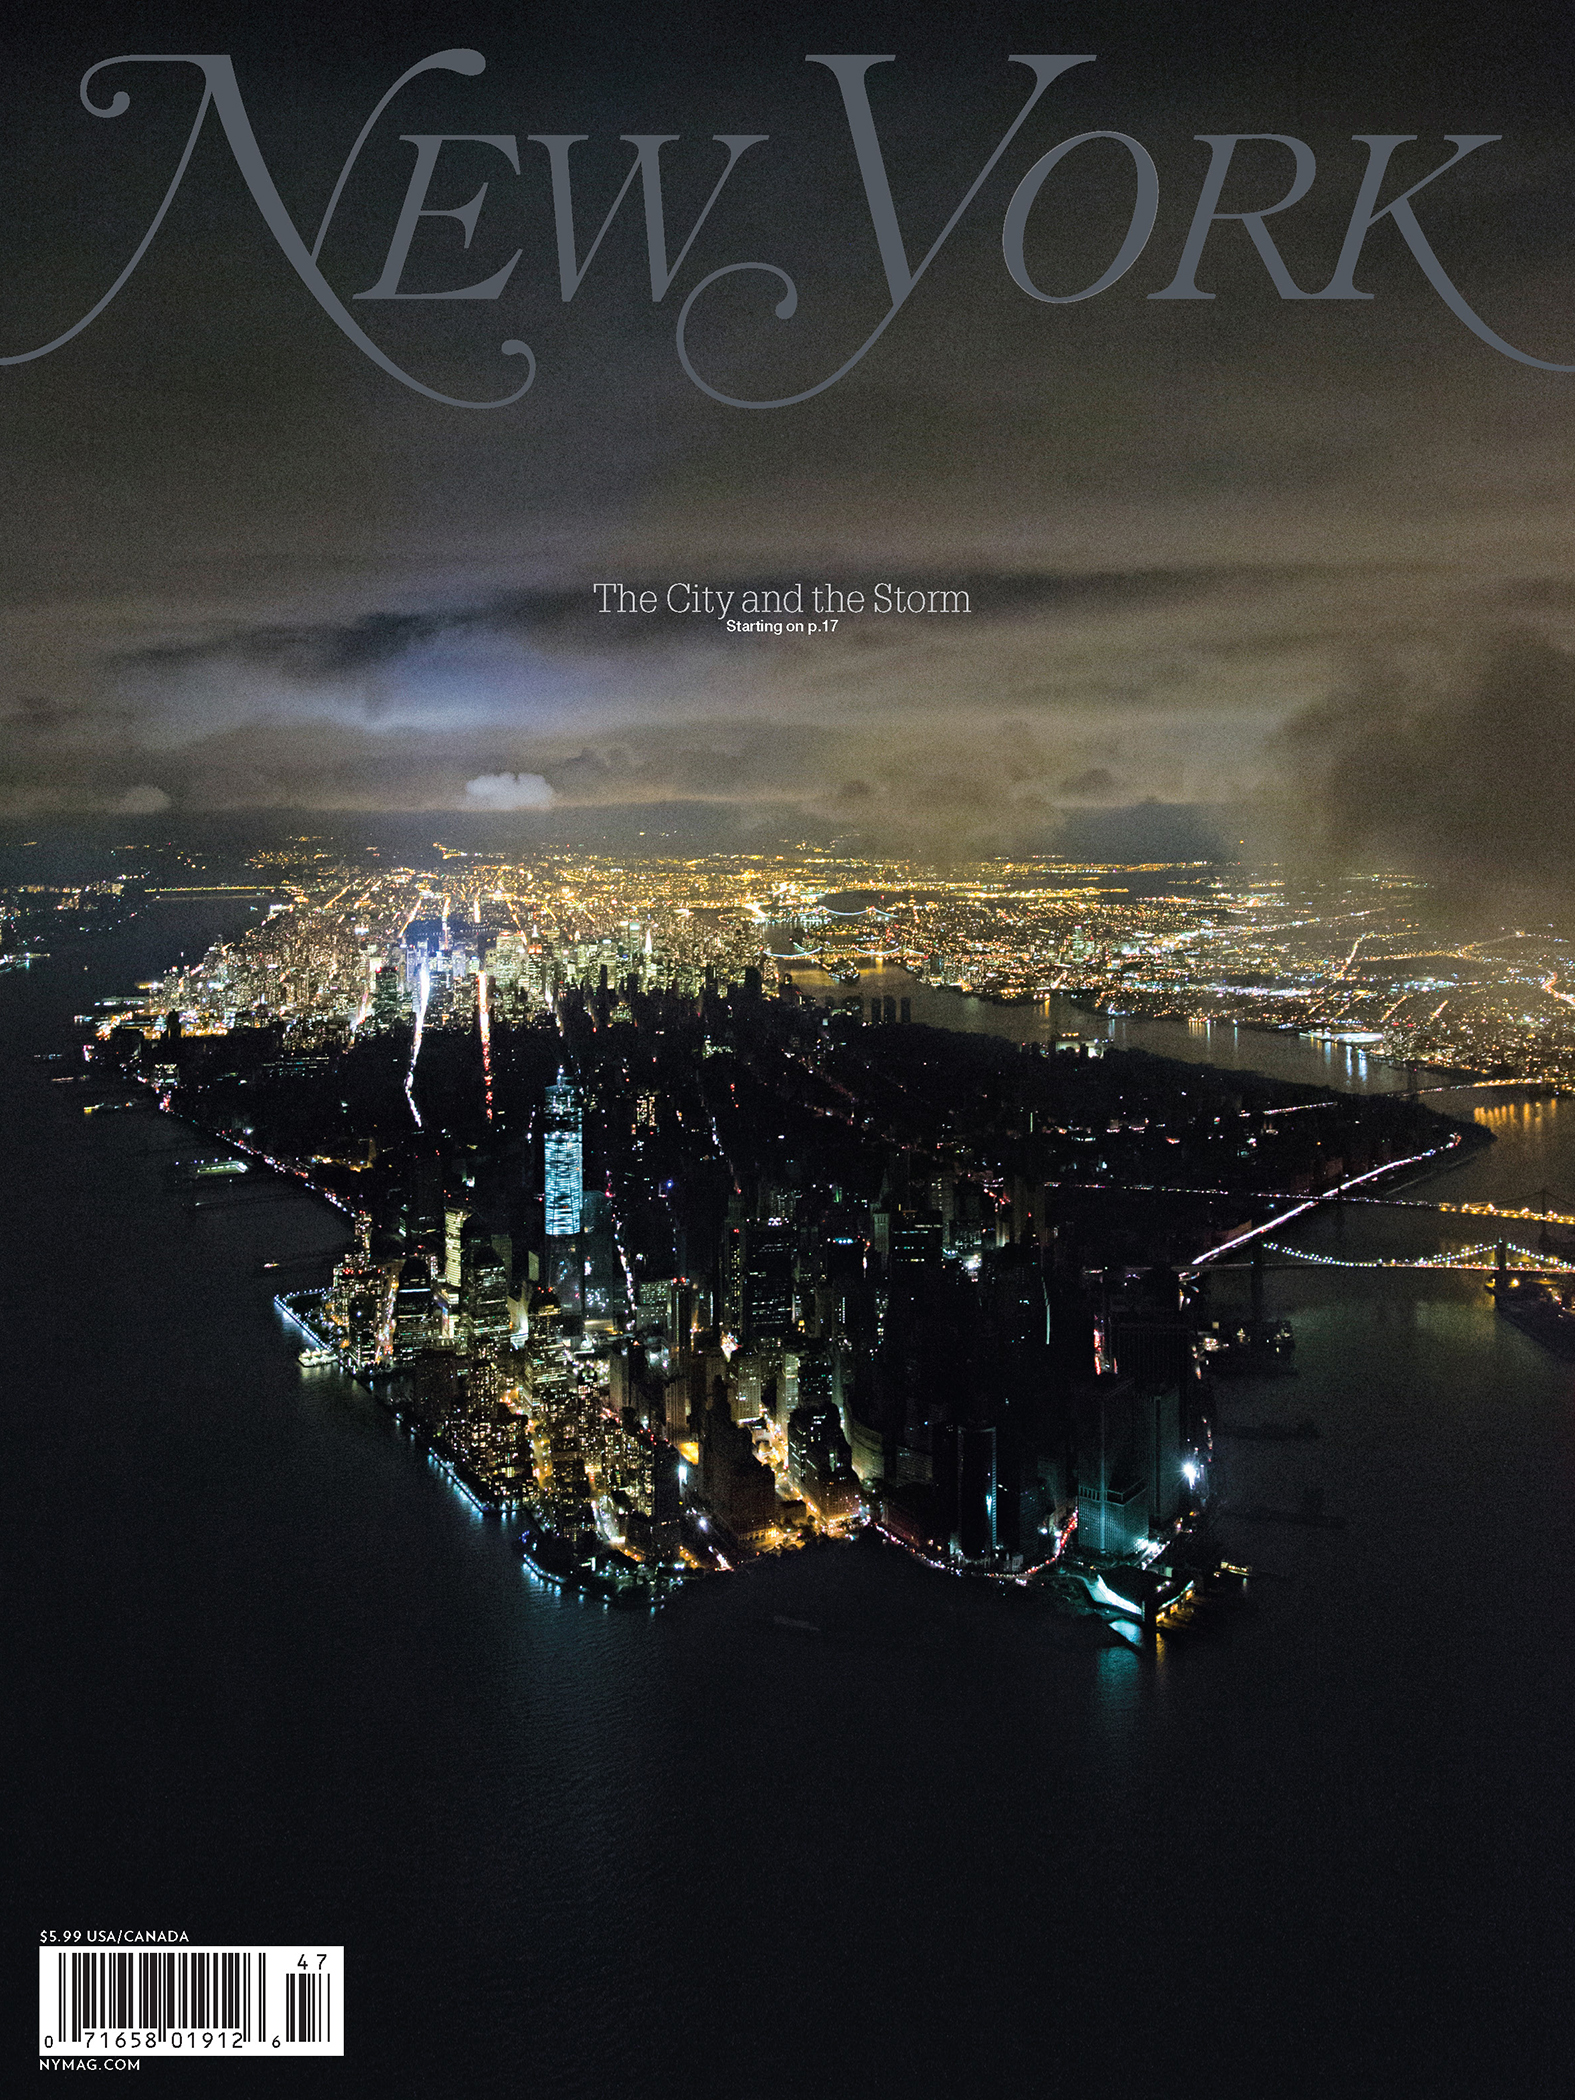 New York - November 12, 2012: "The City and the Storm"